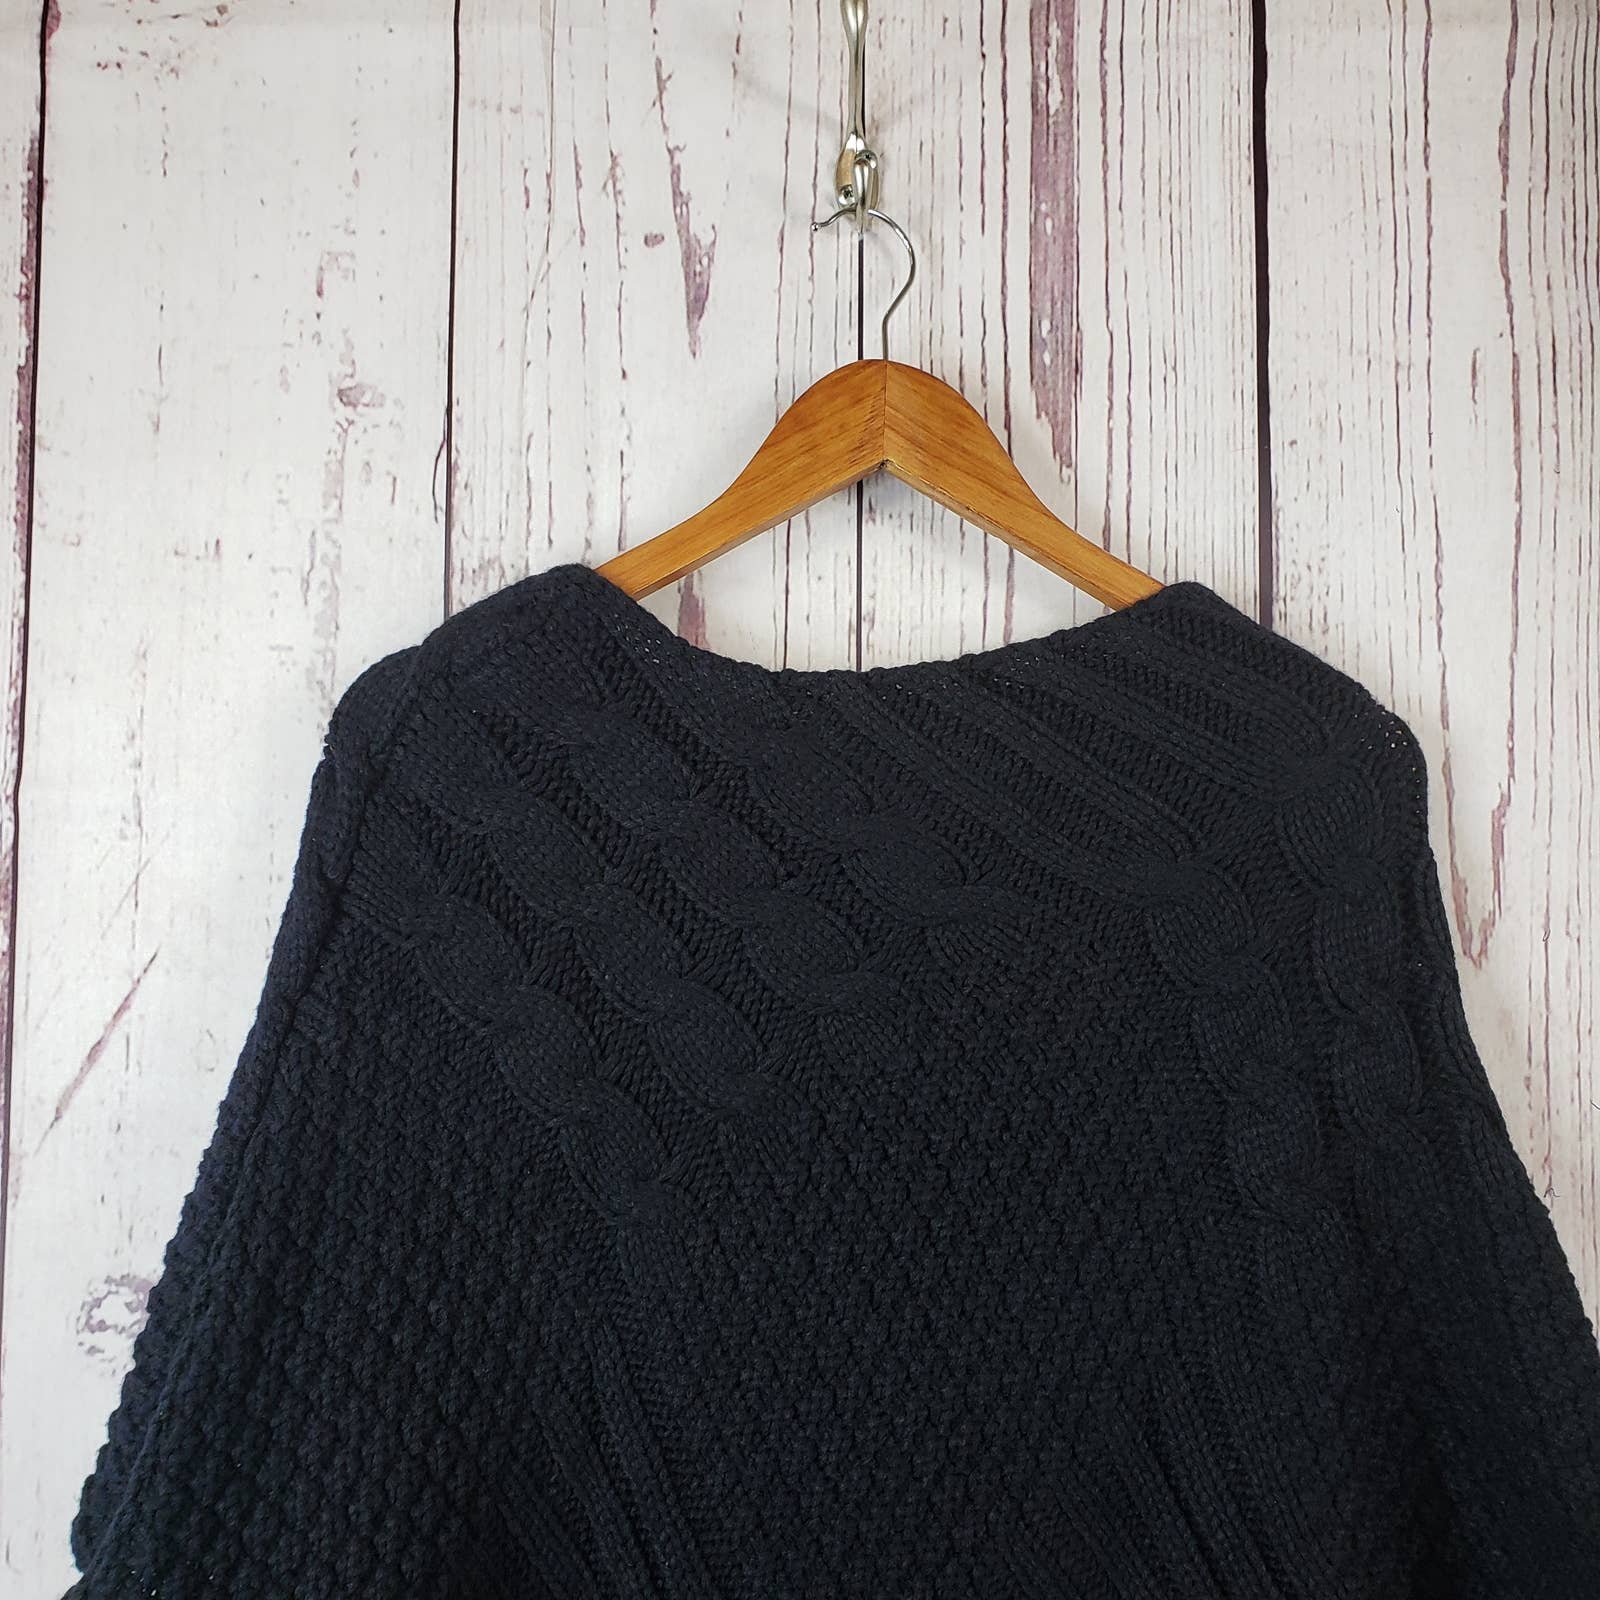 Classic Bazzaara Sweater Cape Womens One Size Cable Knit Black LTS0OER0H just for you